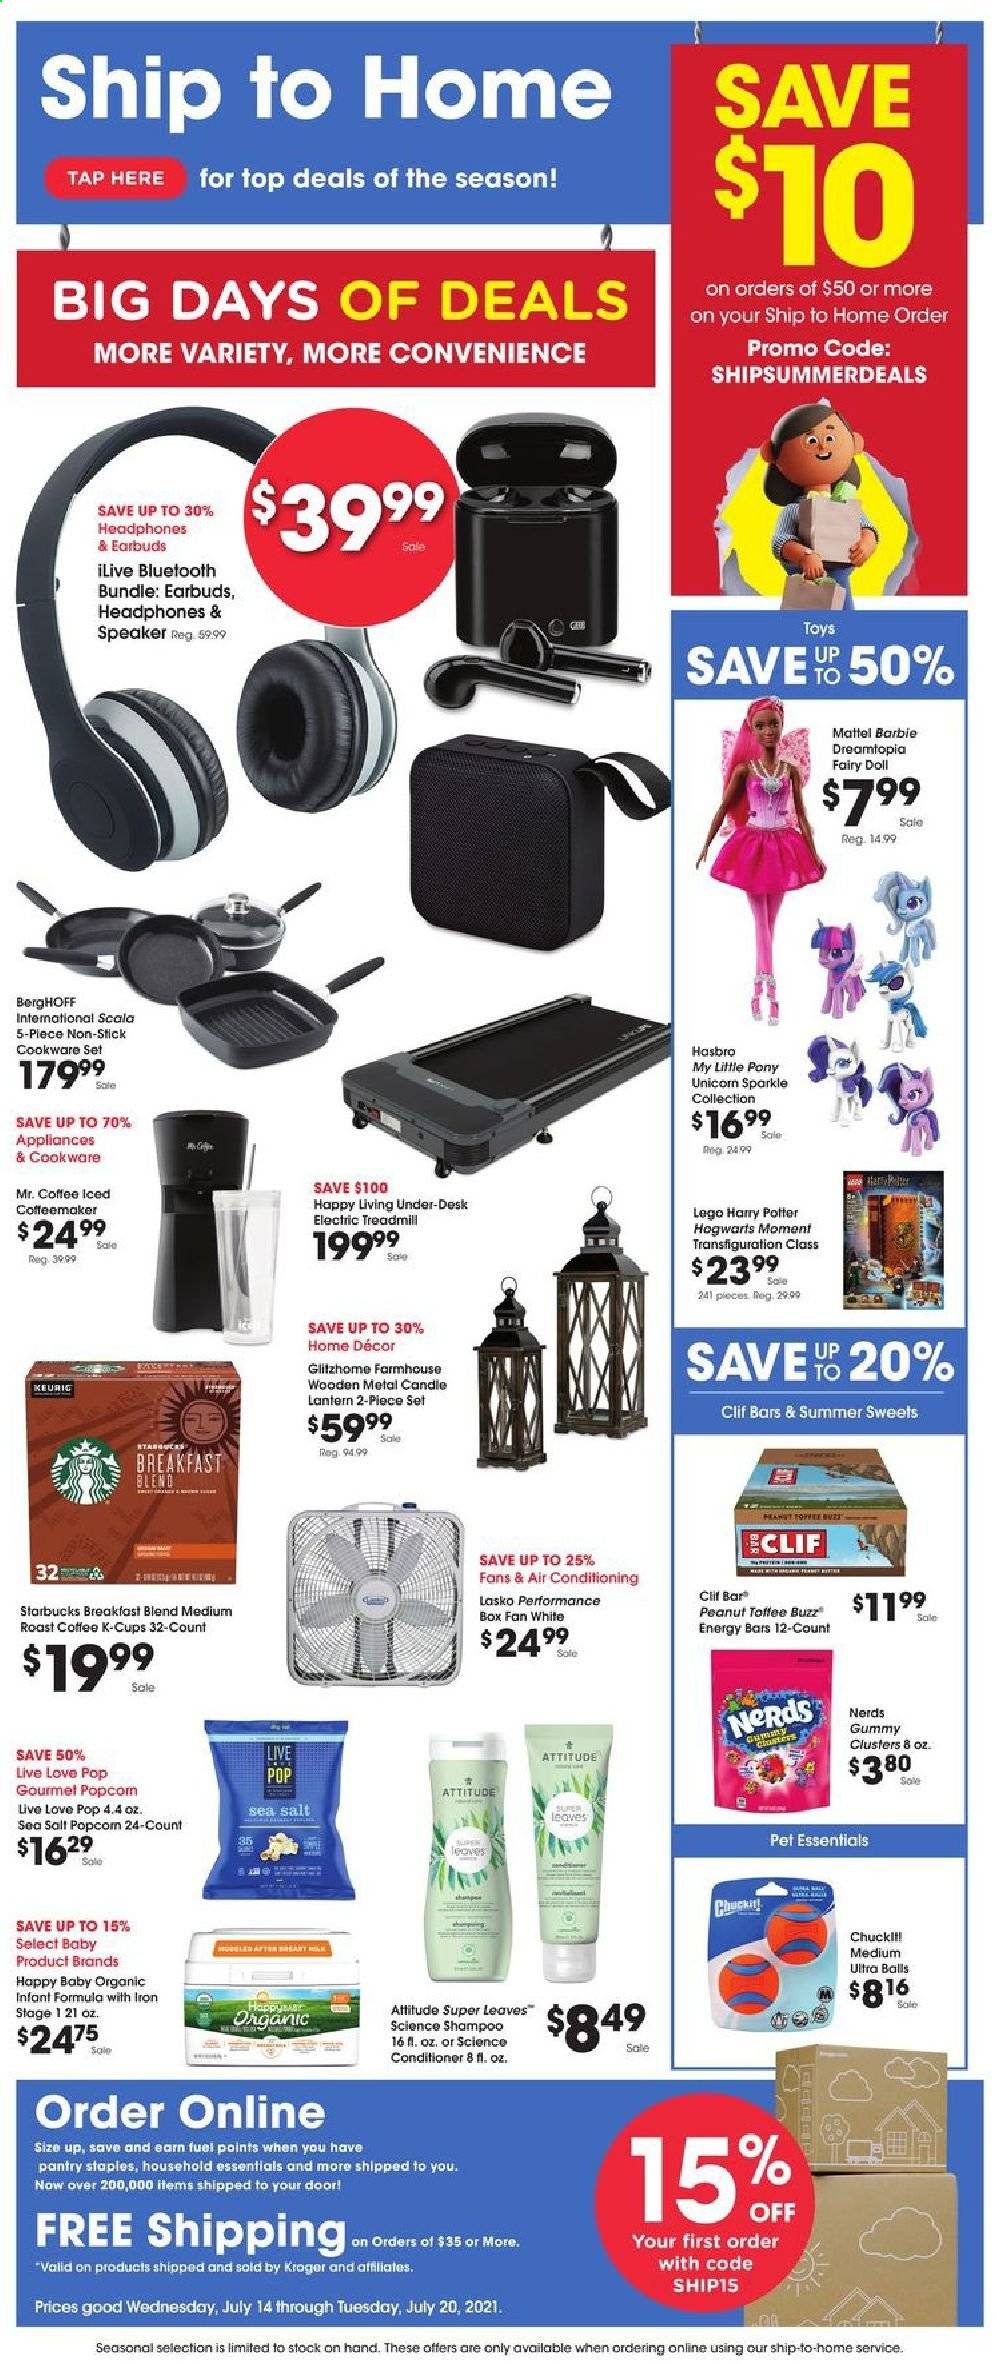 thumbnail - Dillons Flyer - 07/14/2021 - 07/20/2021 - Sales products - sea salt, energy bar, coffee, Starbucks, coffee capsules, K-Cups, Keurig, breakfast blend, Fairy, Cif, shampoo, conditioner, Barbie, cookware set, Harry Potter, Hogwarts, candle, wall fan, iron, doll, LEGO, LEGO Harry Potter, Mattel, My Little Pony, Hasbro, toys, lantern. Page 1.